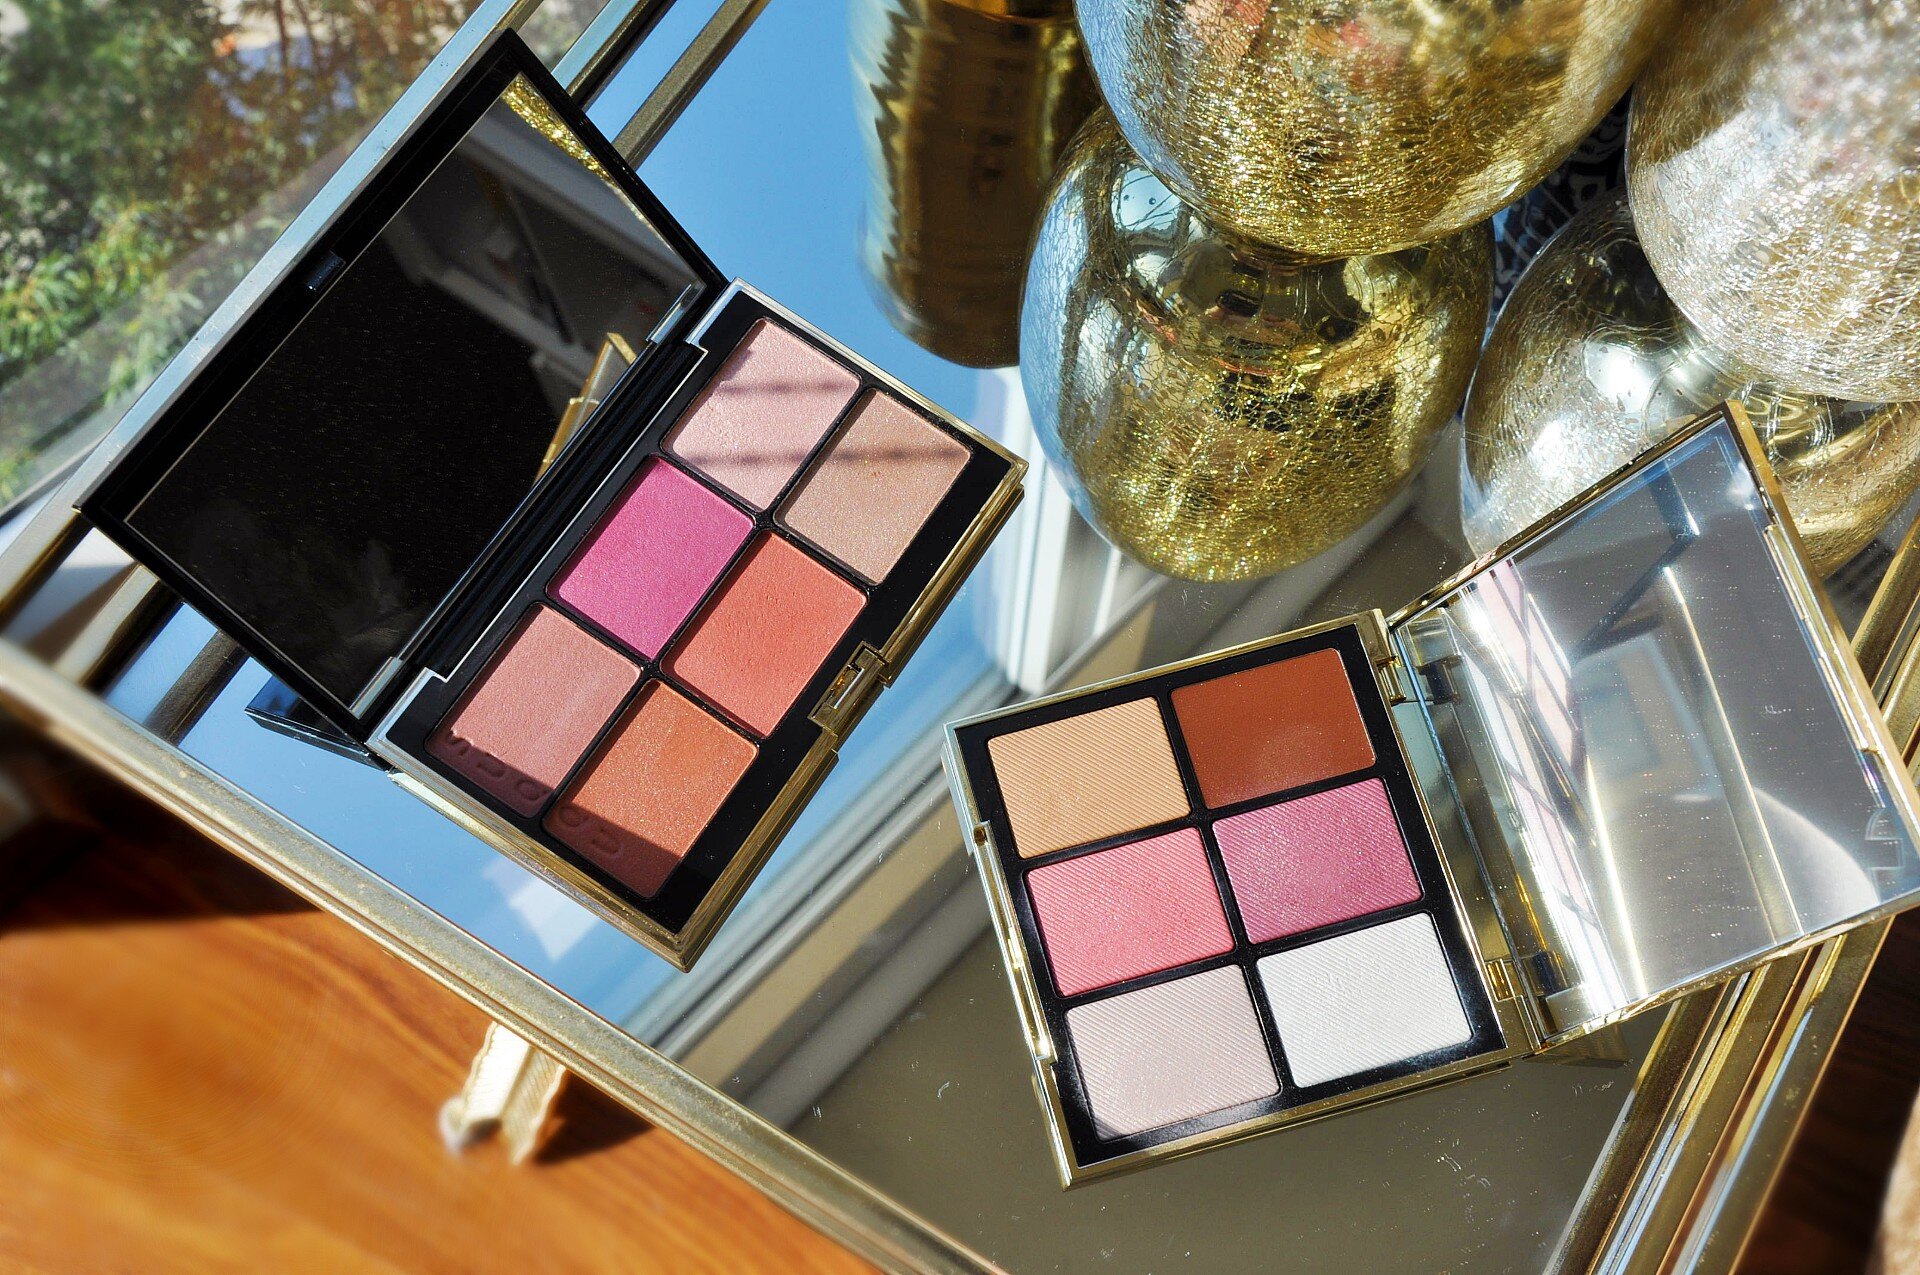 RapidReviews New Palettes by Burberry and Suqqu — The Idea of Beauty